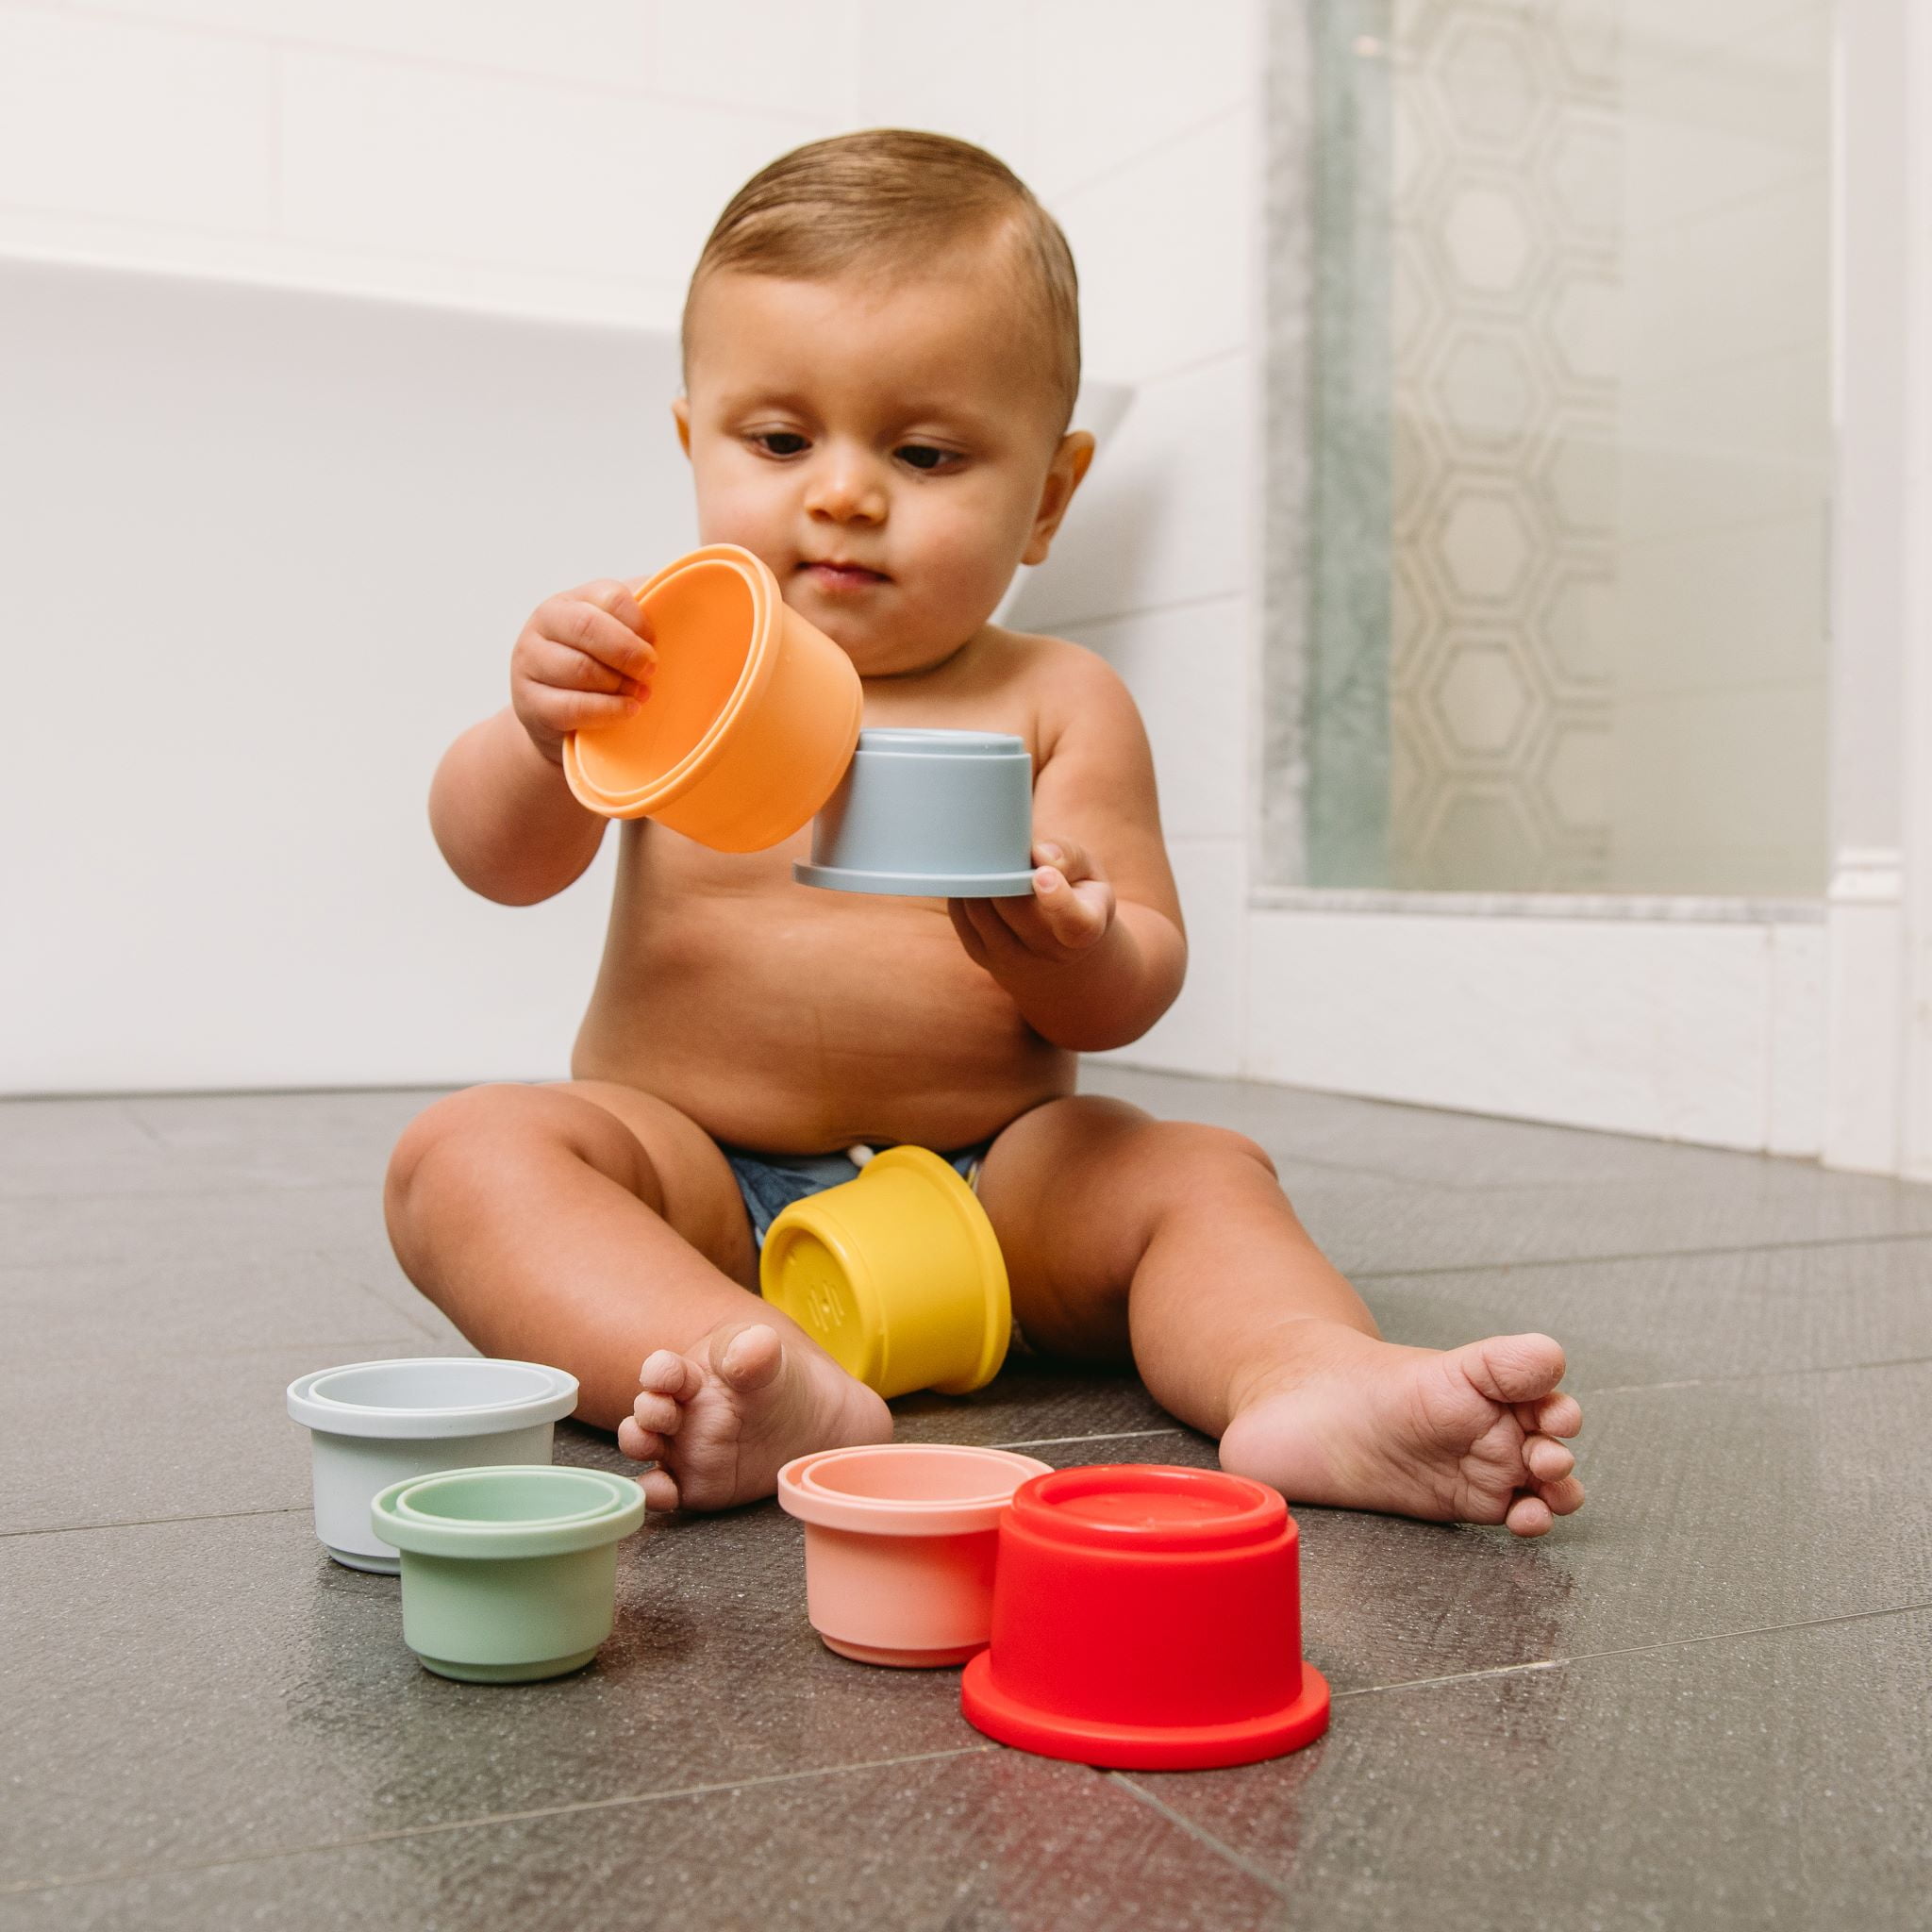 Stacking Play Cups Bath Toys for Toddlers